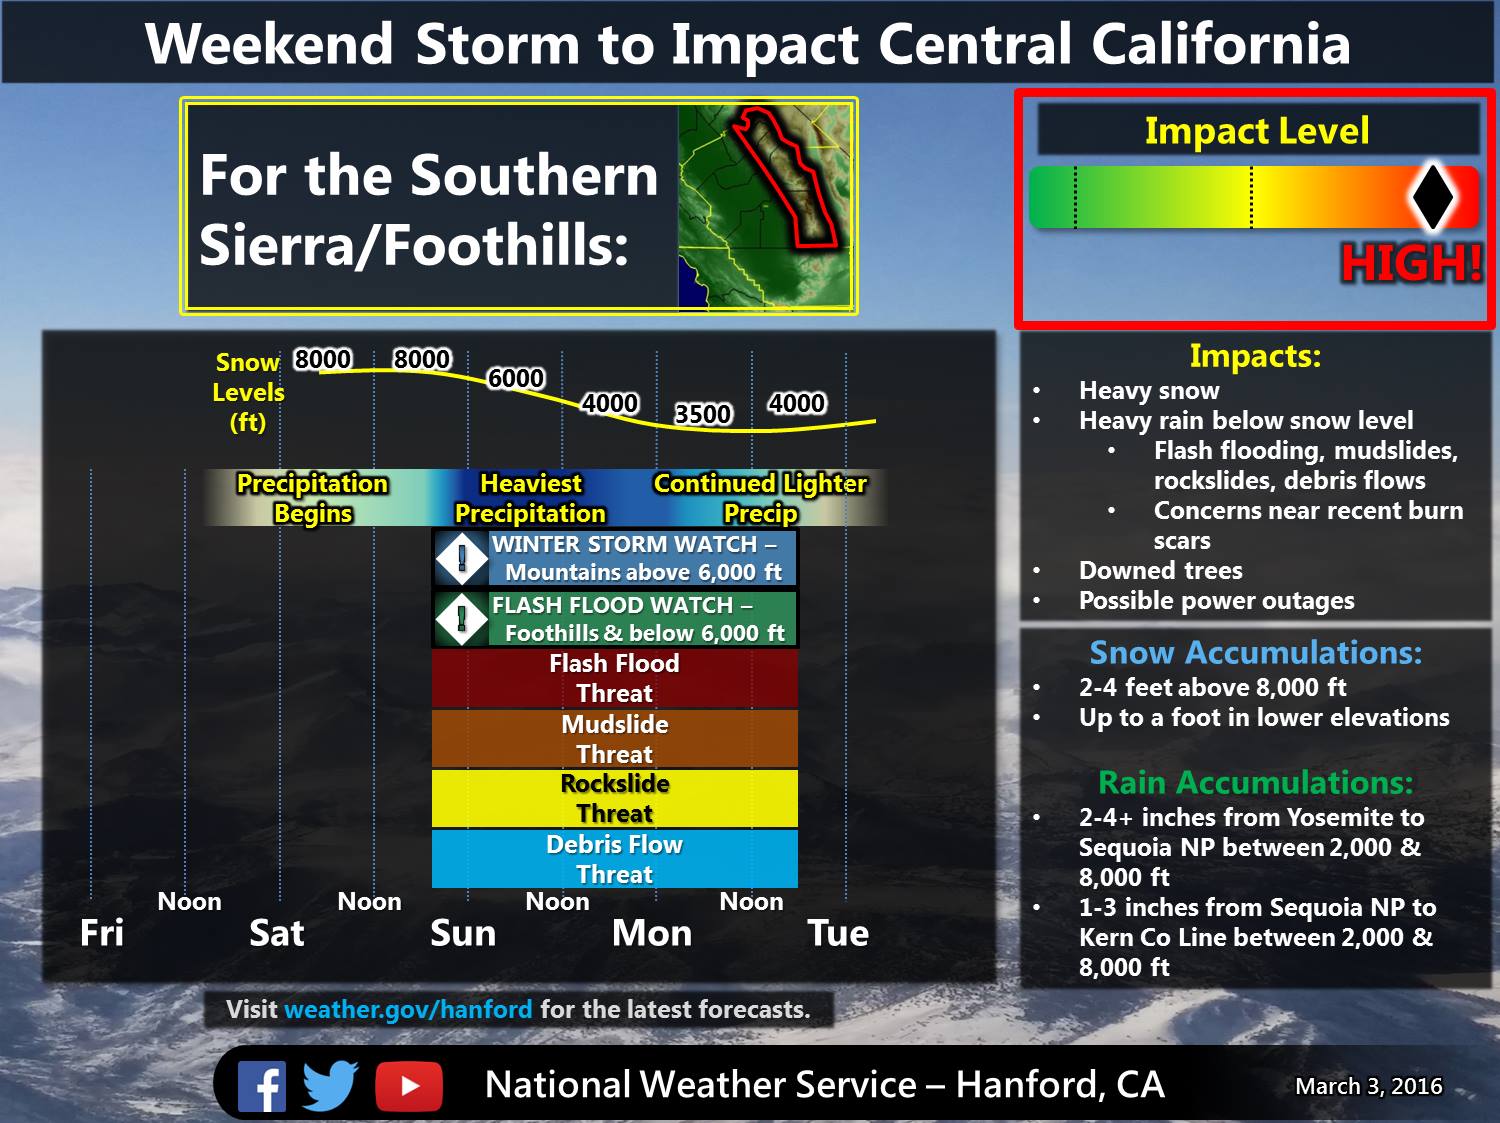 "High-impact winter storm forecast this weekend for Central California. We have issued a Winter Storm Watch for the southern Sierra from Yosemite National Park to the Kern County line beginning at 9 pm on Saturday. Snow levels will start high and many locations will experience rain to start off on Saturday. Because of the threat of heavy rain, we have issued a Flash Flood Watch in the Sierra Foothills. Storm total of 2-4 FEET of snow is expected above 8,000 feet, and 2-4 or more inches of rain is expected below 6,000 feet. Now is the time to prepare for this high-impact system." - NOAA Hanford, CA today